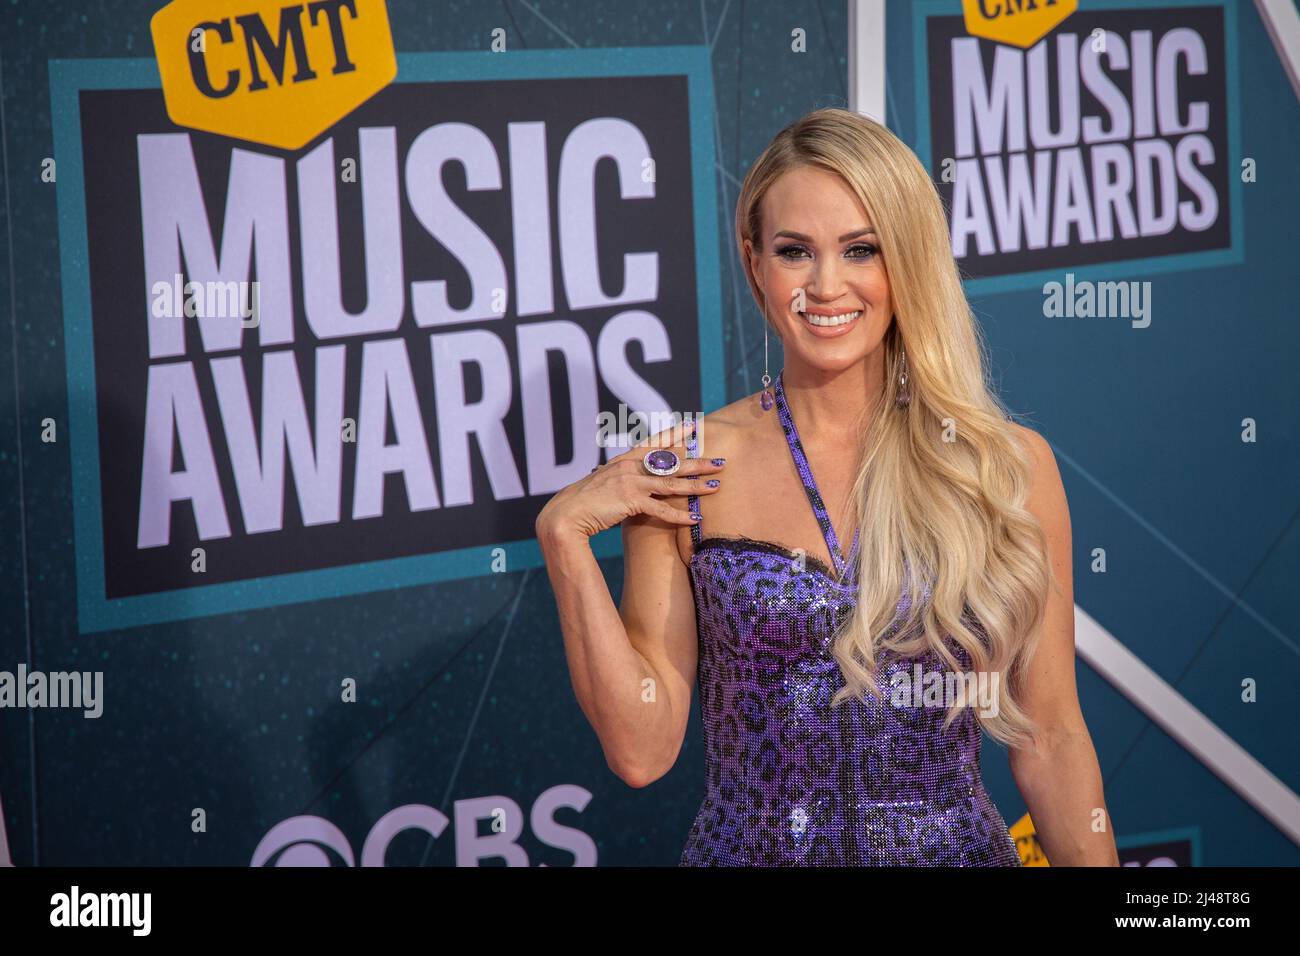 Nashville, Tenn. - April 11, 2022 Carrie Underwood arrives at the red carpet for the 2022 CMT Awards on April 11, 2022 at Municipal Auditorium in Nashville, Tenn. Credit: Jamie Gilliam/The Photo Access Stock Photo